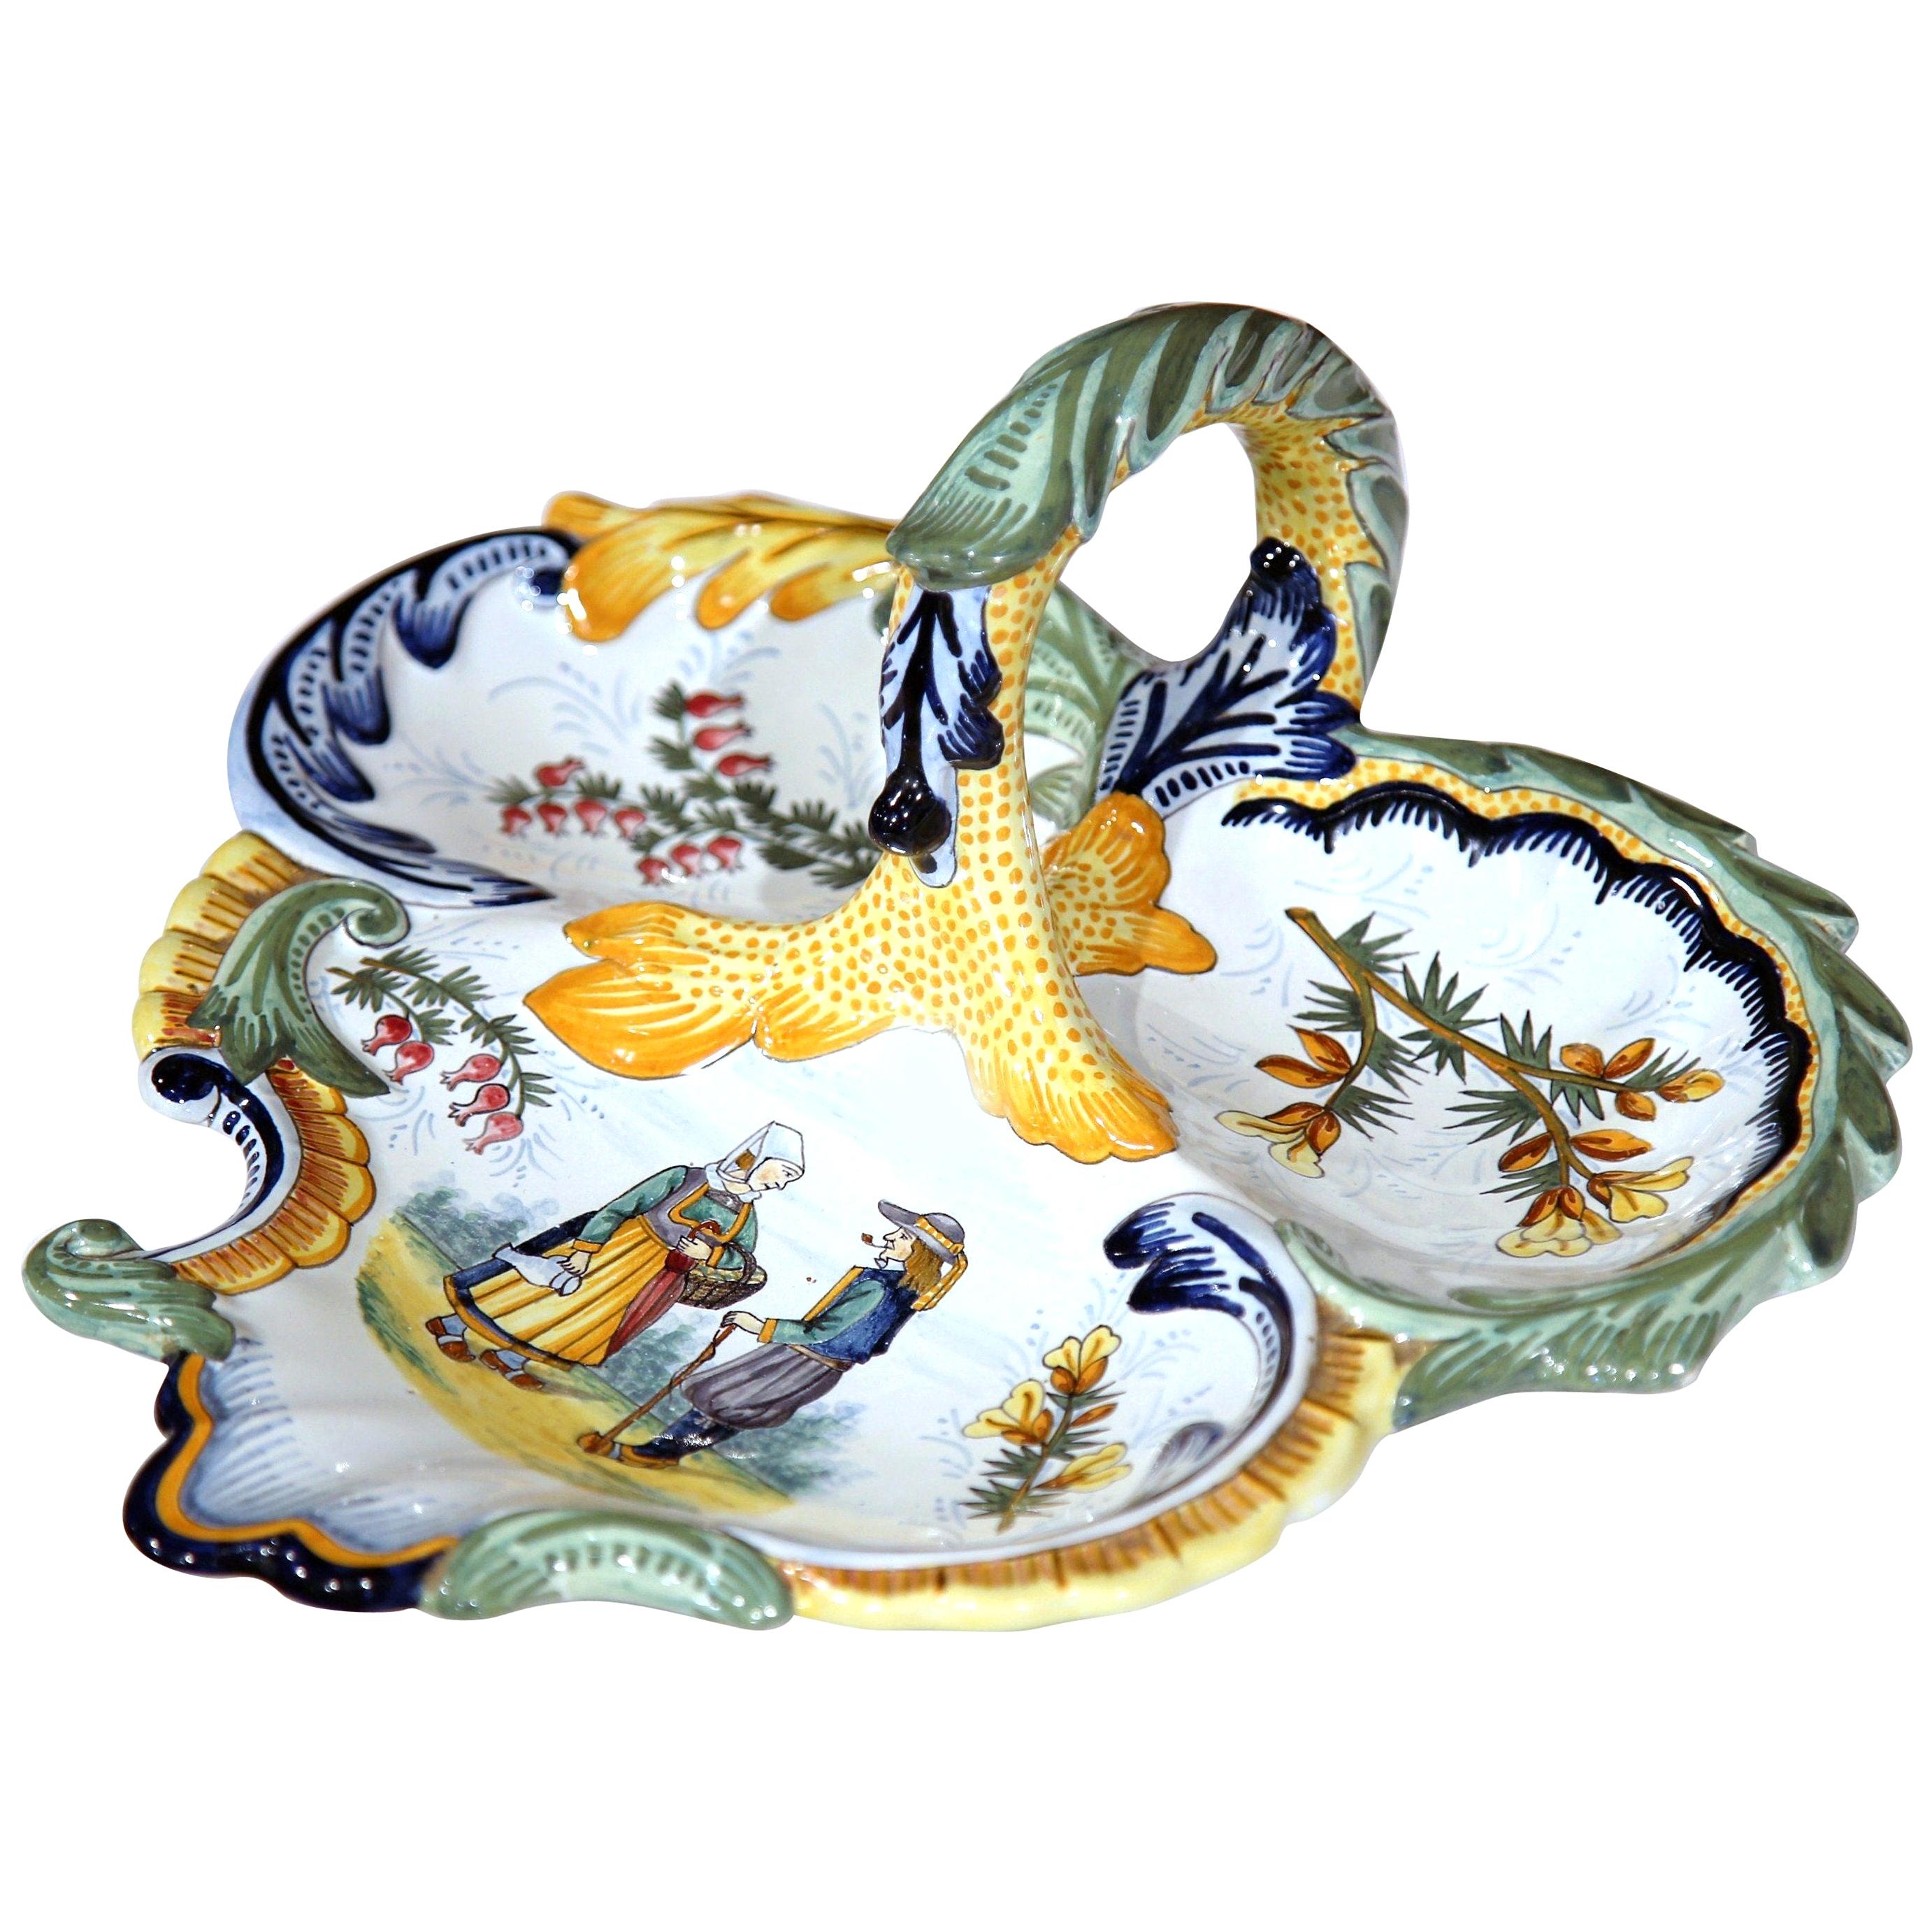 This colorful, antique Quimper dish with central handle was sculpted in Brittany, France, circa 1950. Shaped as a heart, the porcelain tray features three unique food compartments decorated with hand painted flowers and a Briton couple dressed in